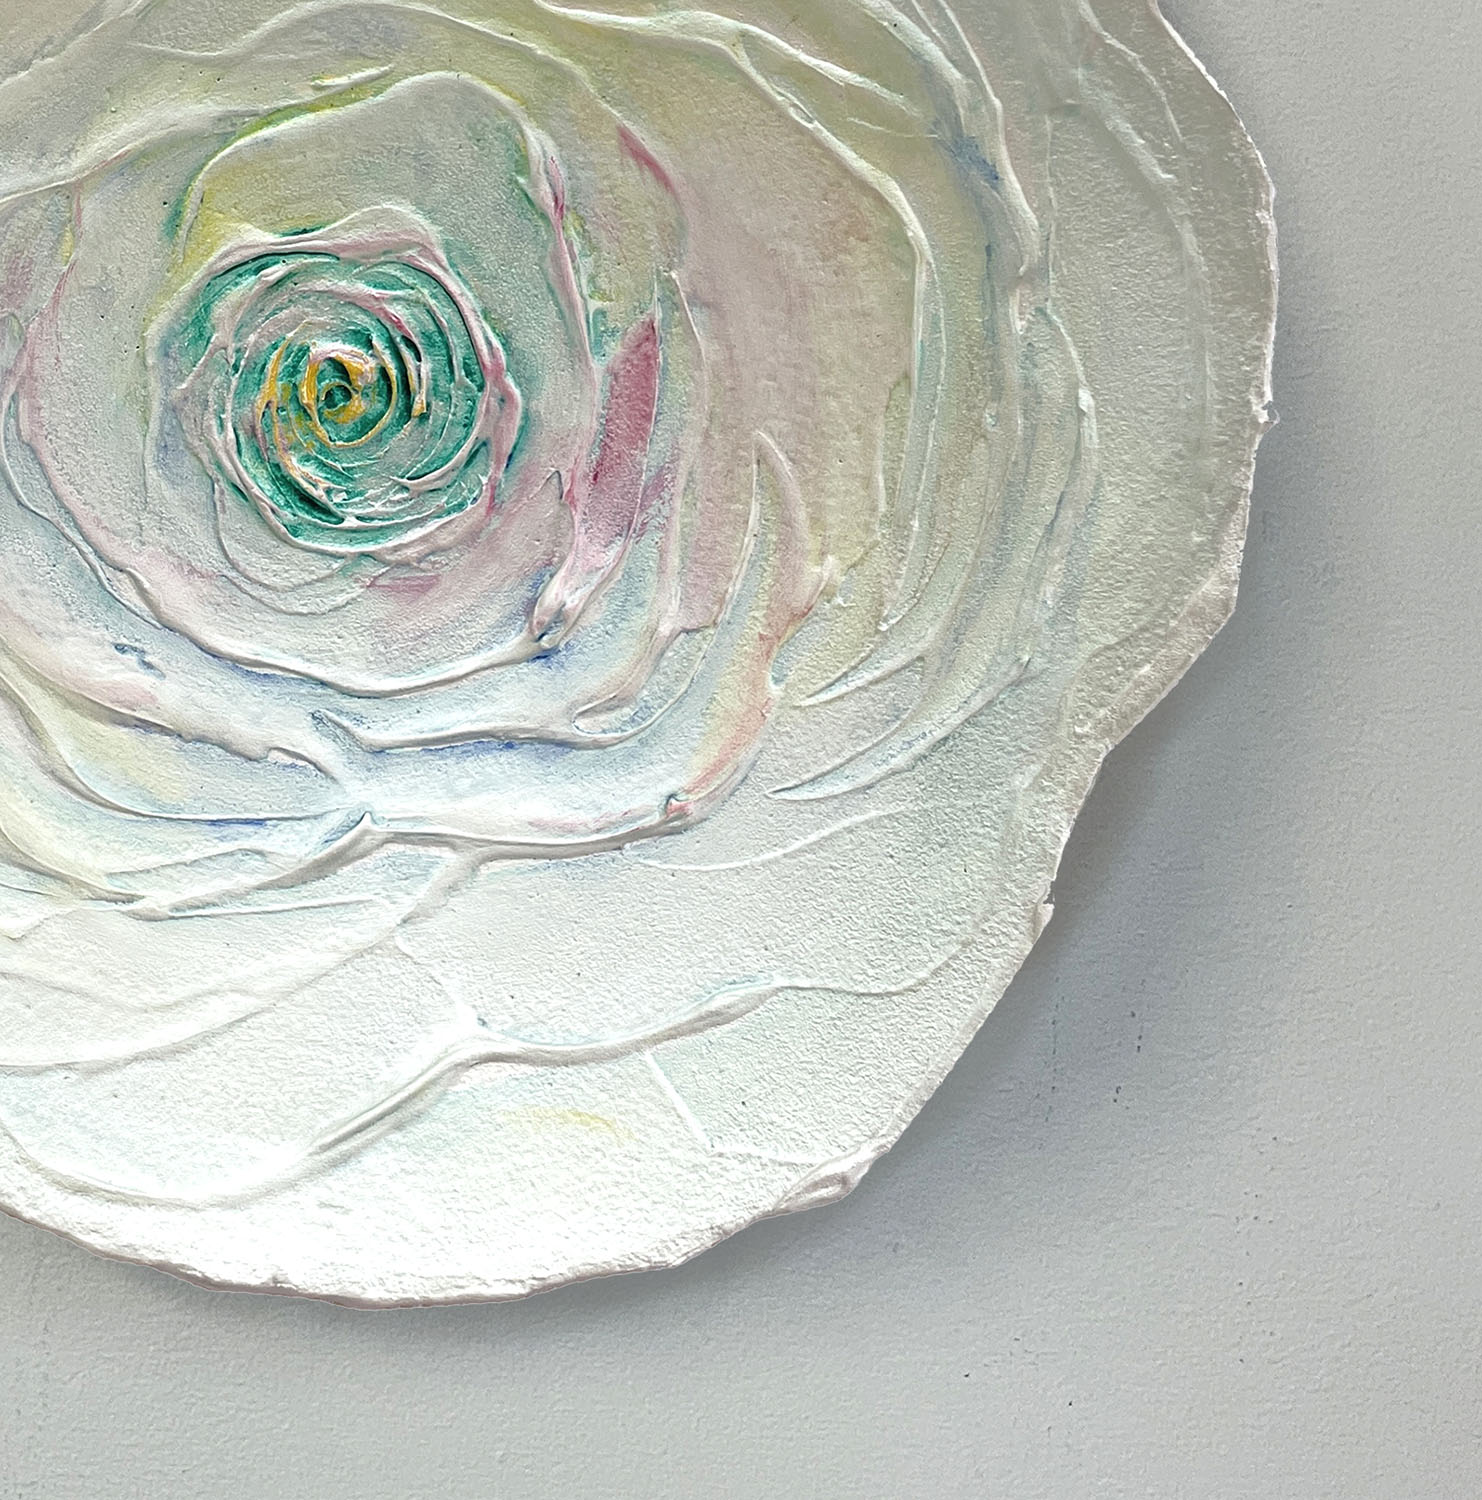 Happy For Me - Abstract Rose Vessel Wall Sculpture